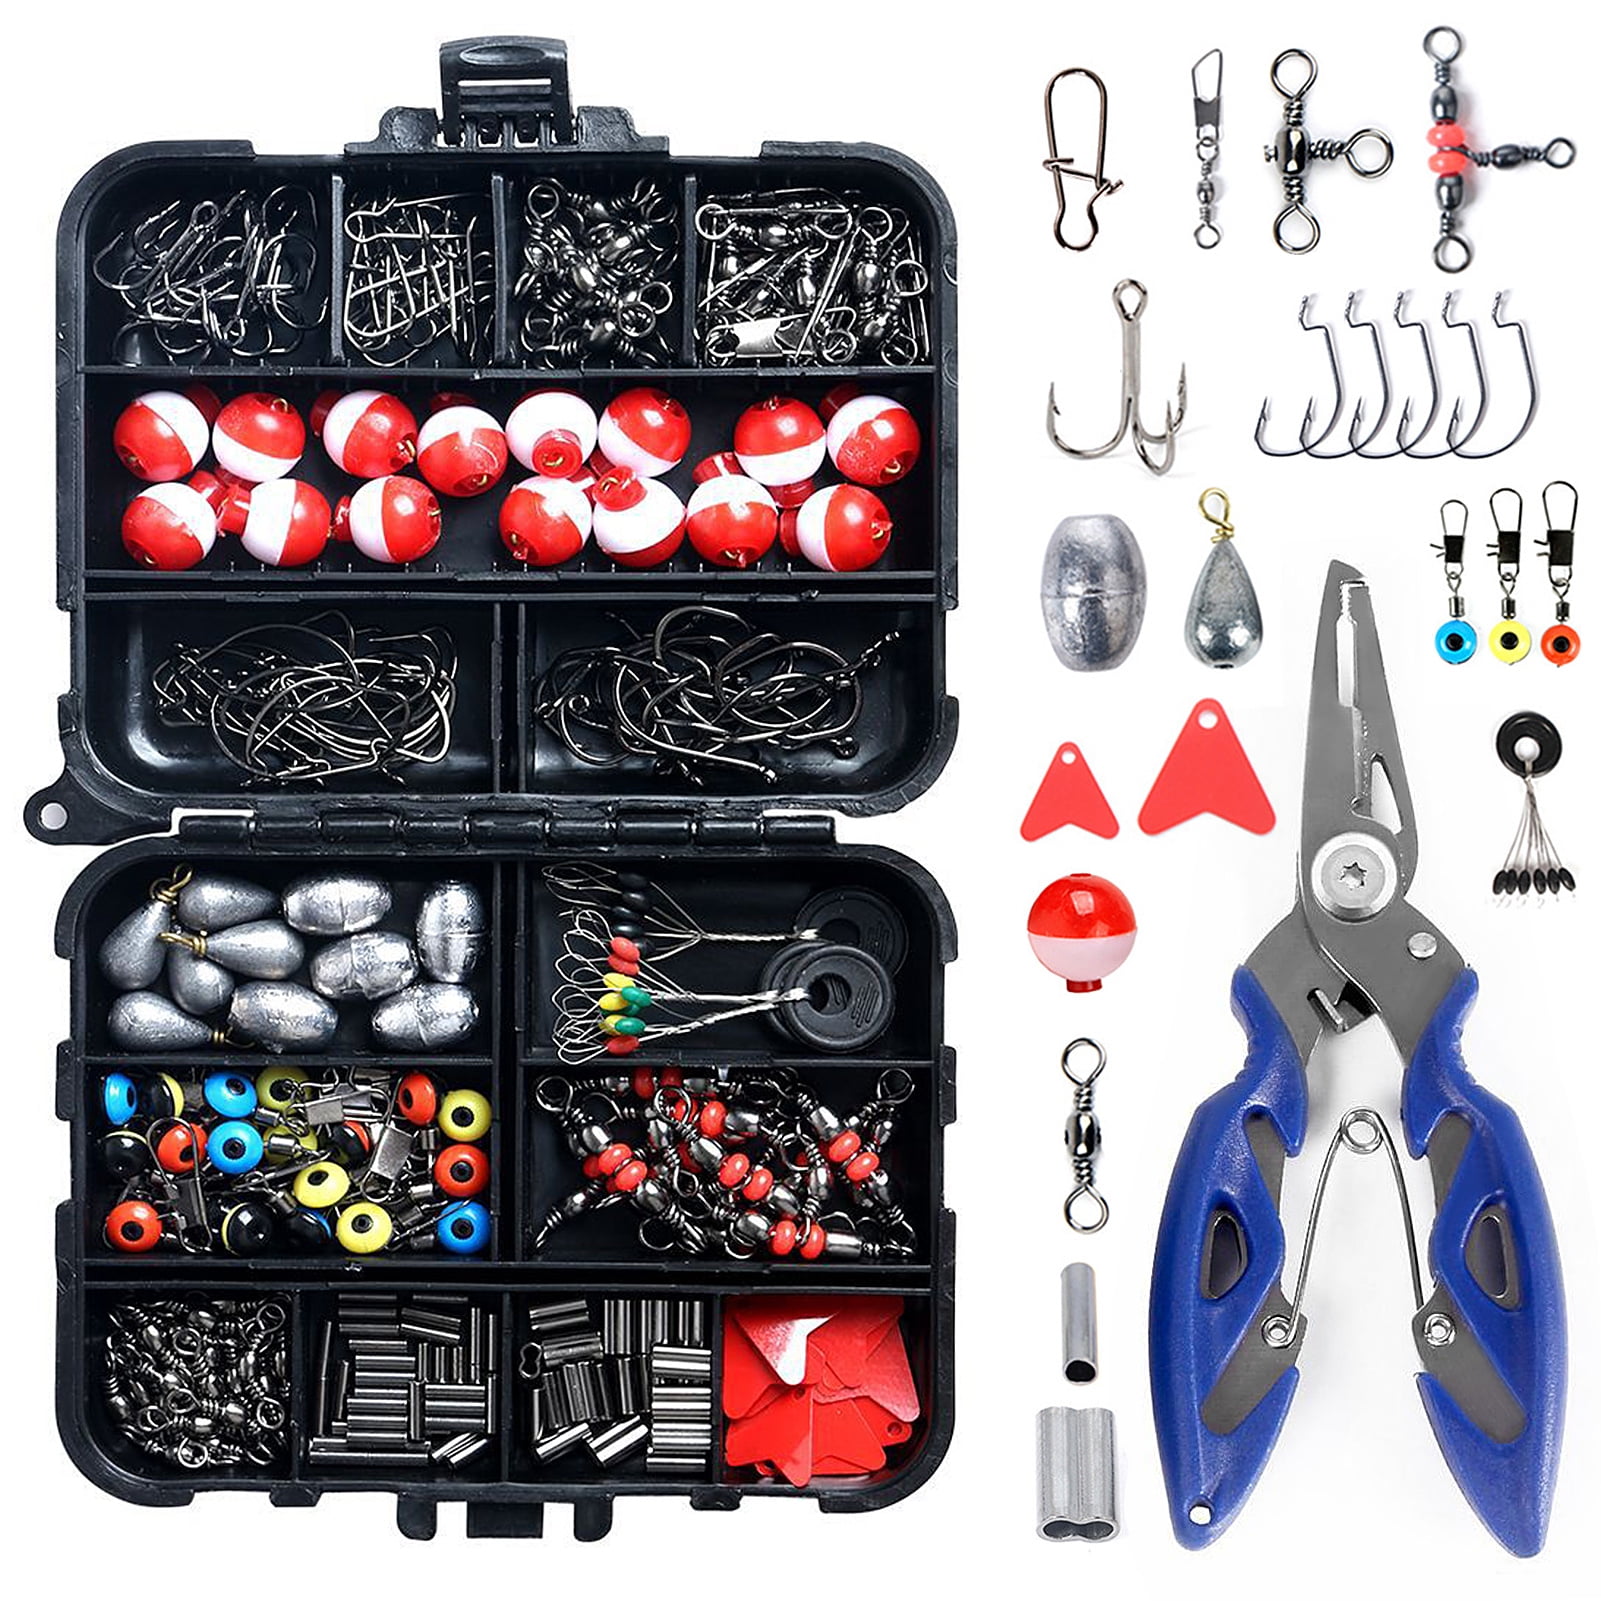 224pcs/252pcs Fishing Accessories Kit Including Jig Hooks Floats Spoons  Casting Sinker Weights Fishing Swivels Snaps Sinker Slides Fishing Set with